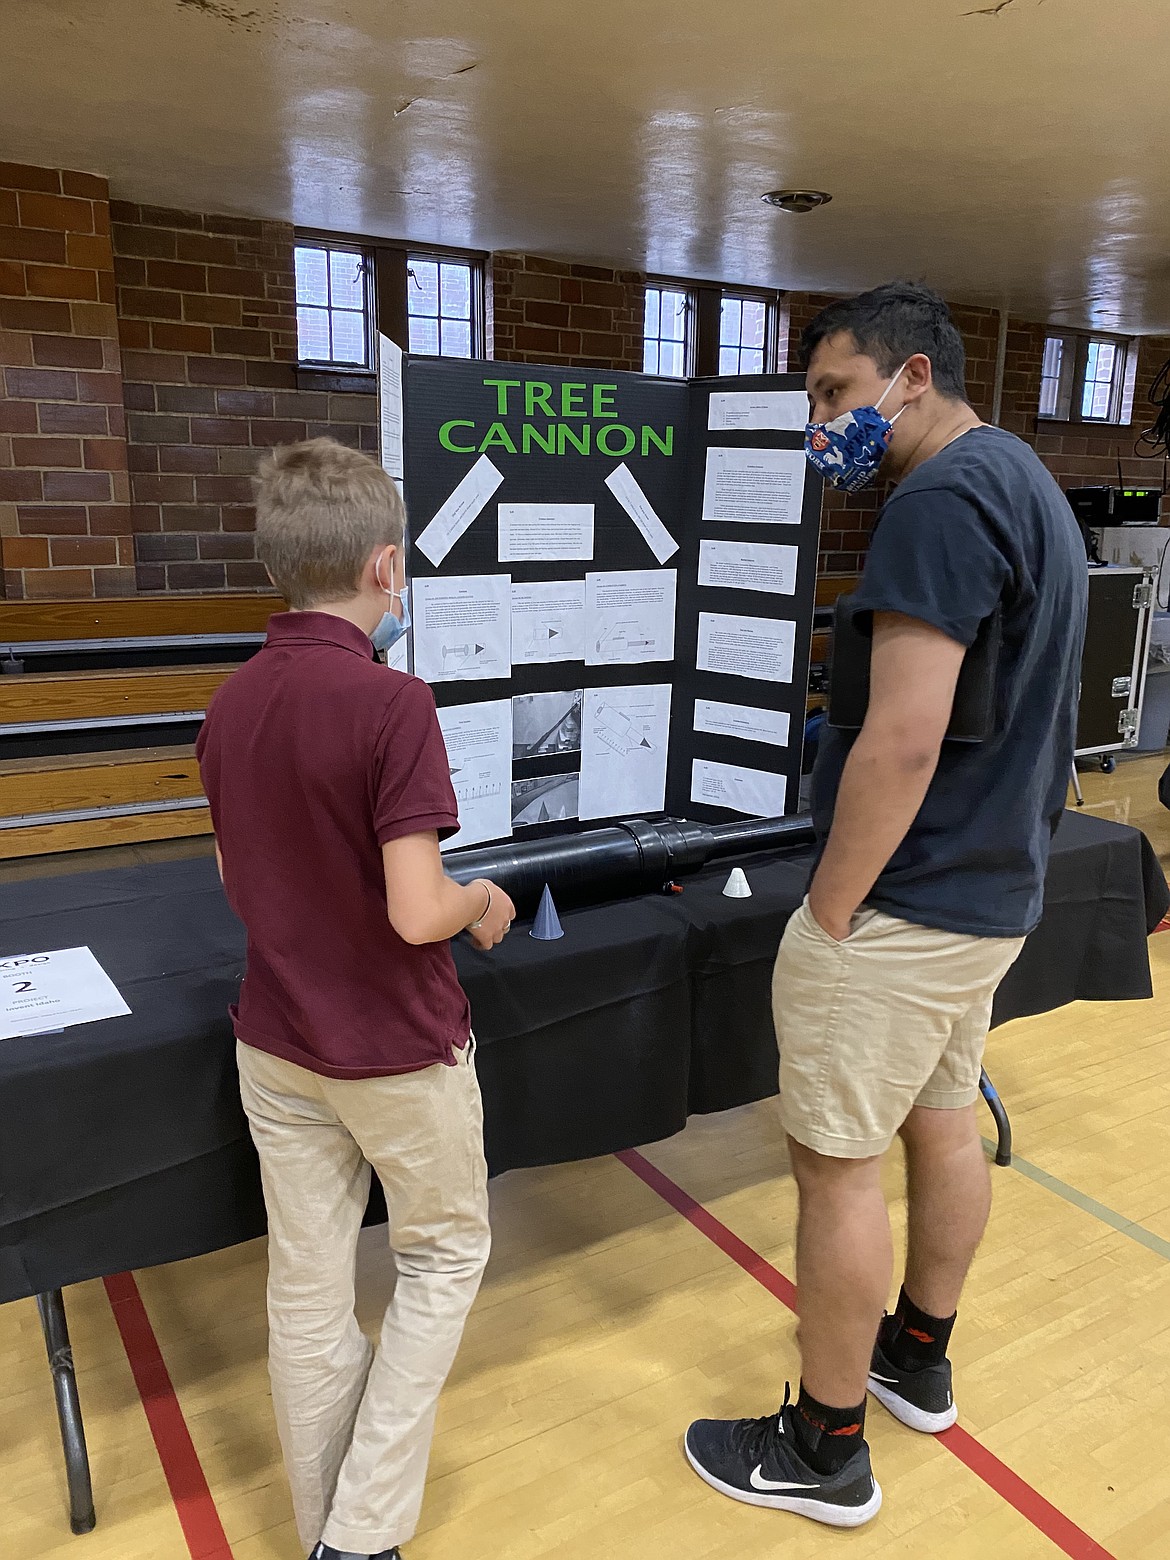 Thirteen-year-old inventor Sam Wilson explains his Tree Cannon idea to University of Idaho undergraduate students at a recent engineering expo.